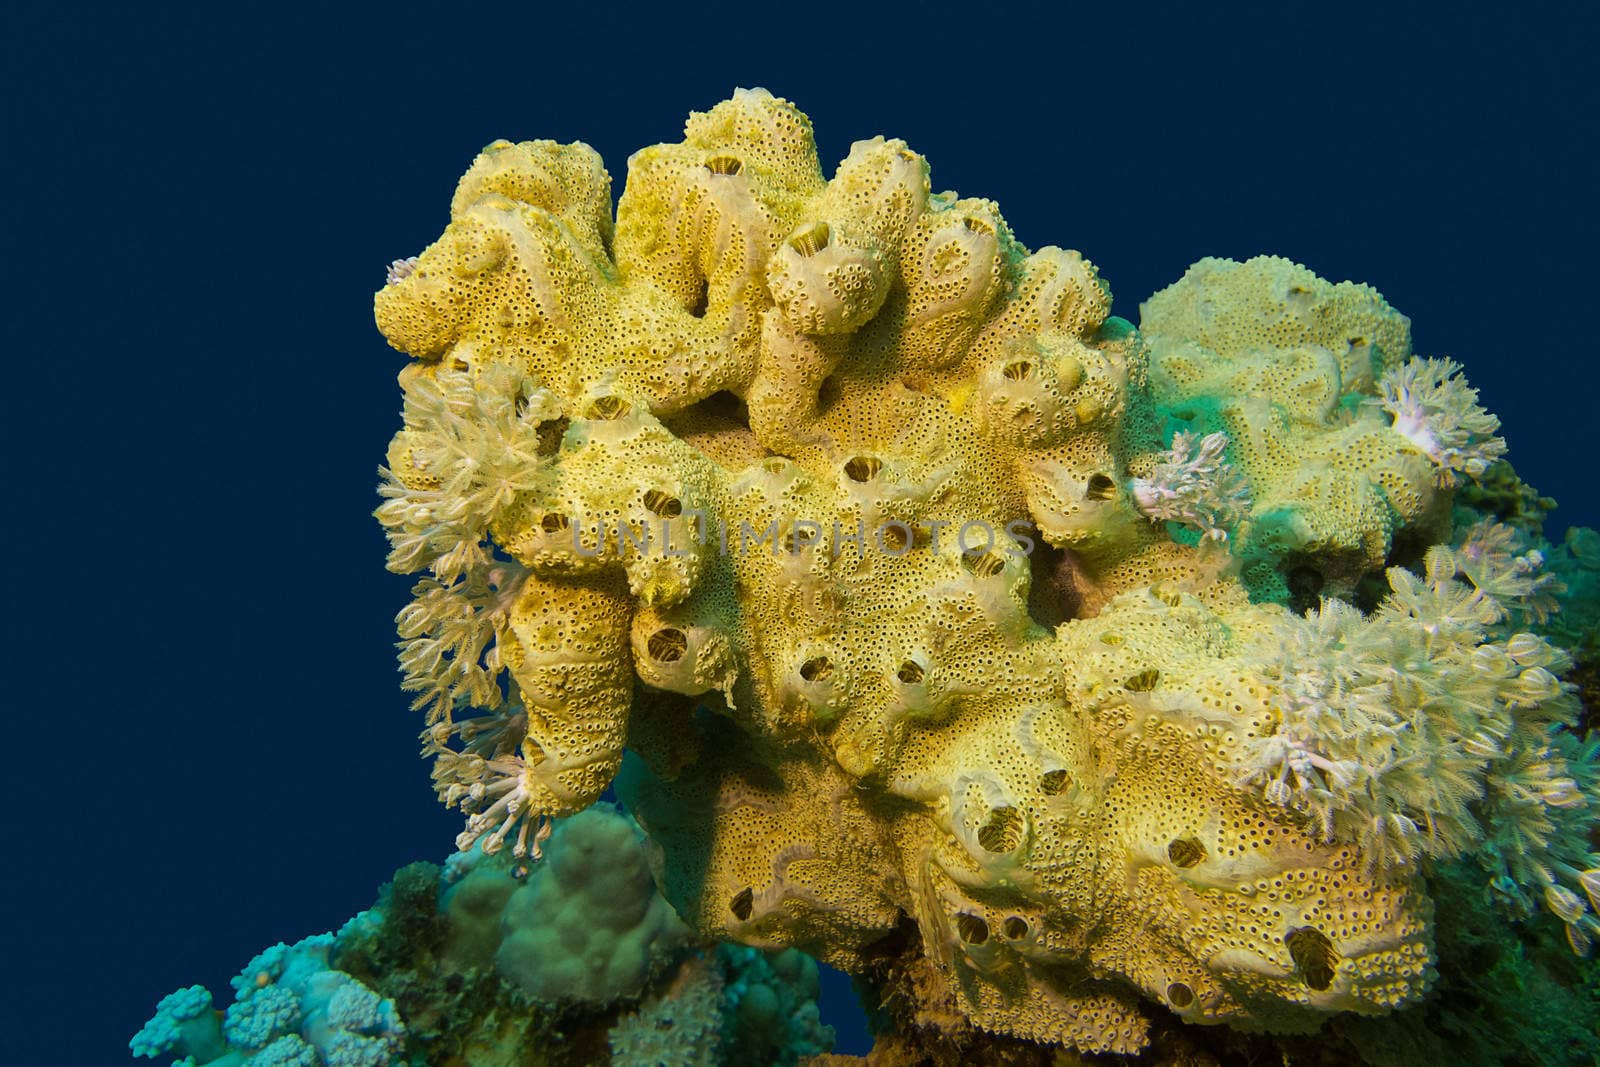 coral reef with great yellow sea sponge at the bottom of tropical sea on blue water background